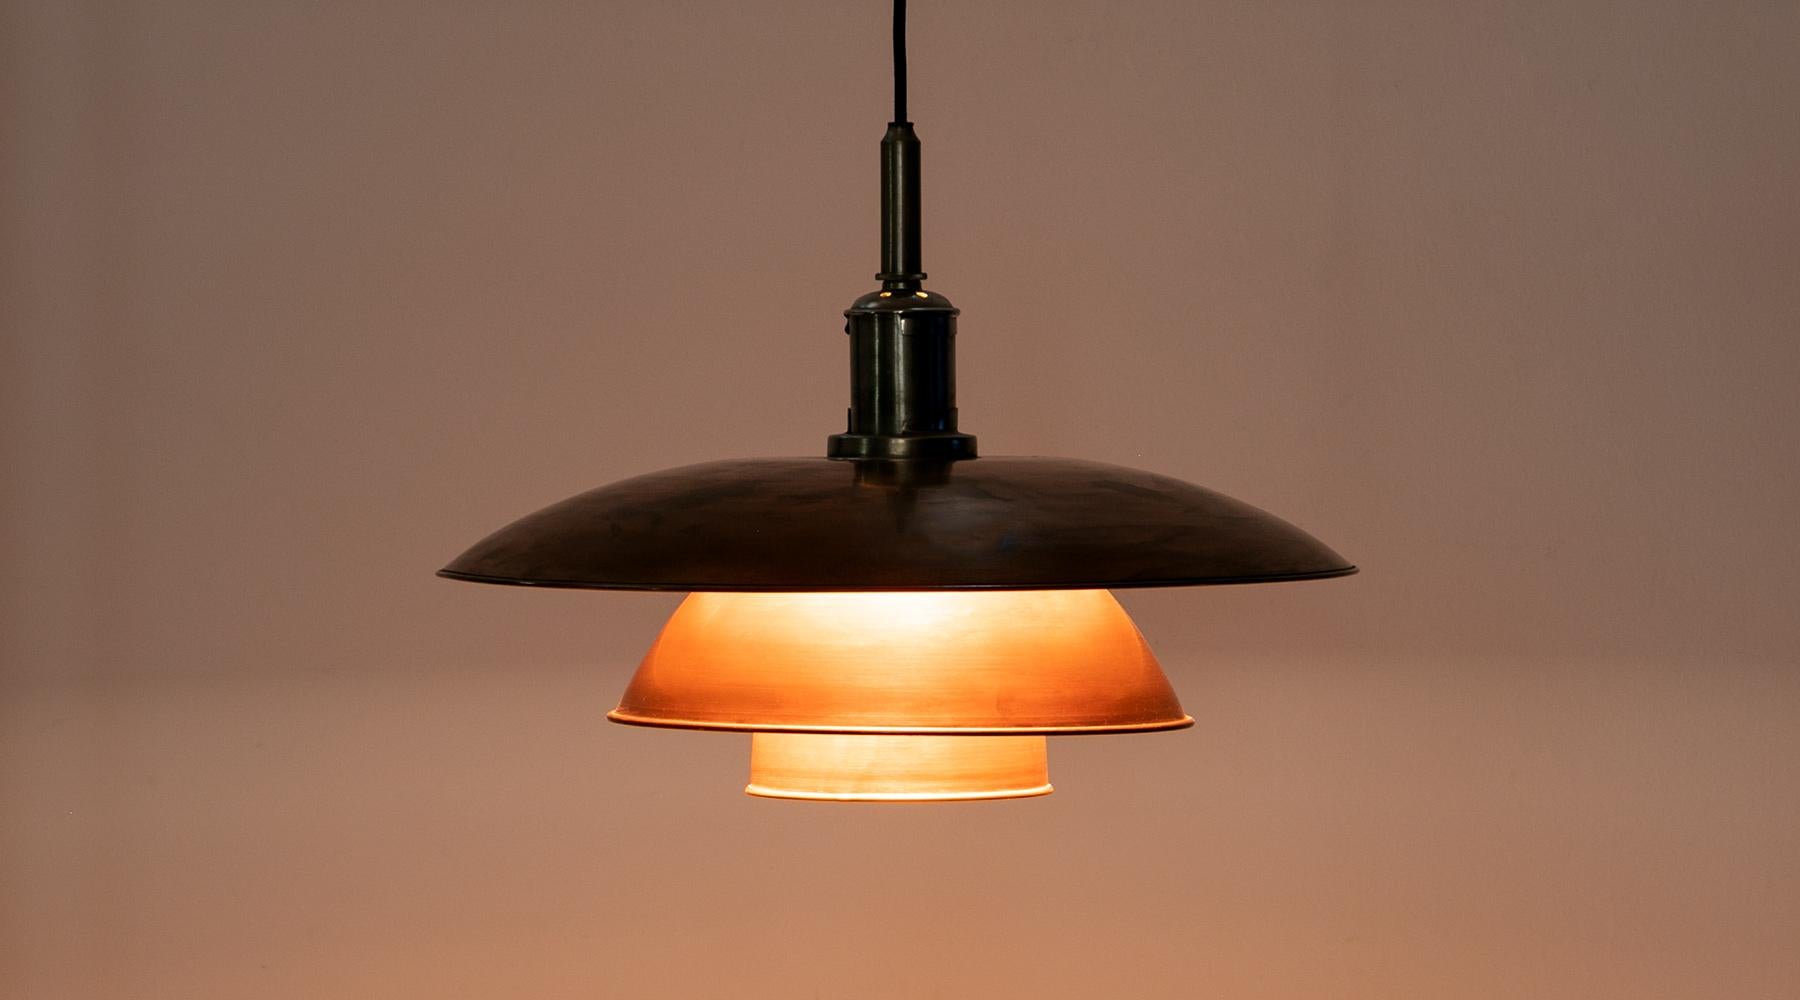 Ceiling lamp 5/5 in reddish Kupfer by Poul Henningsen, Denmark, 1930.

Ceiling lamp of Poul Henningsen pendants with copper shades and nickel-plated fitment gives a soft, warm light. Designed by Poul Henningsen in the 1930s. He designed several